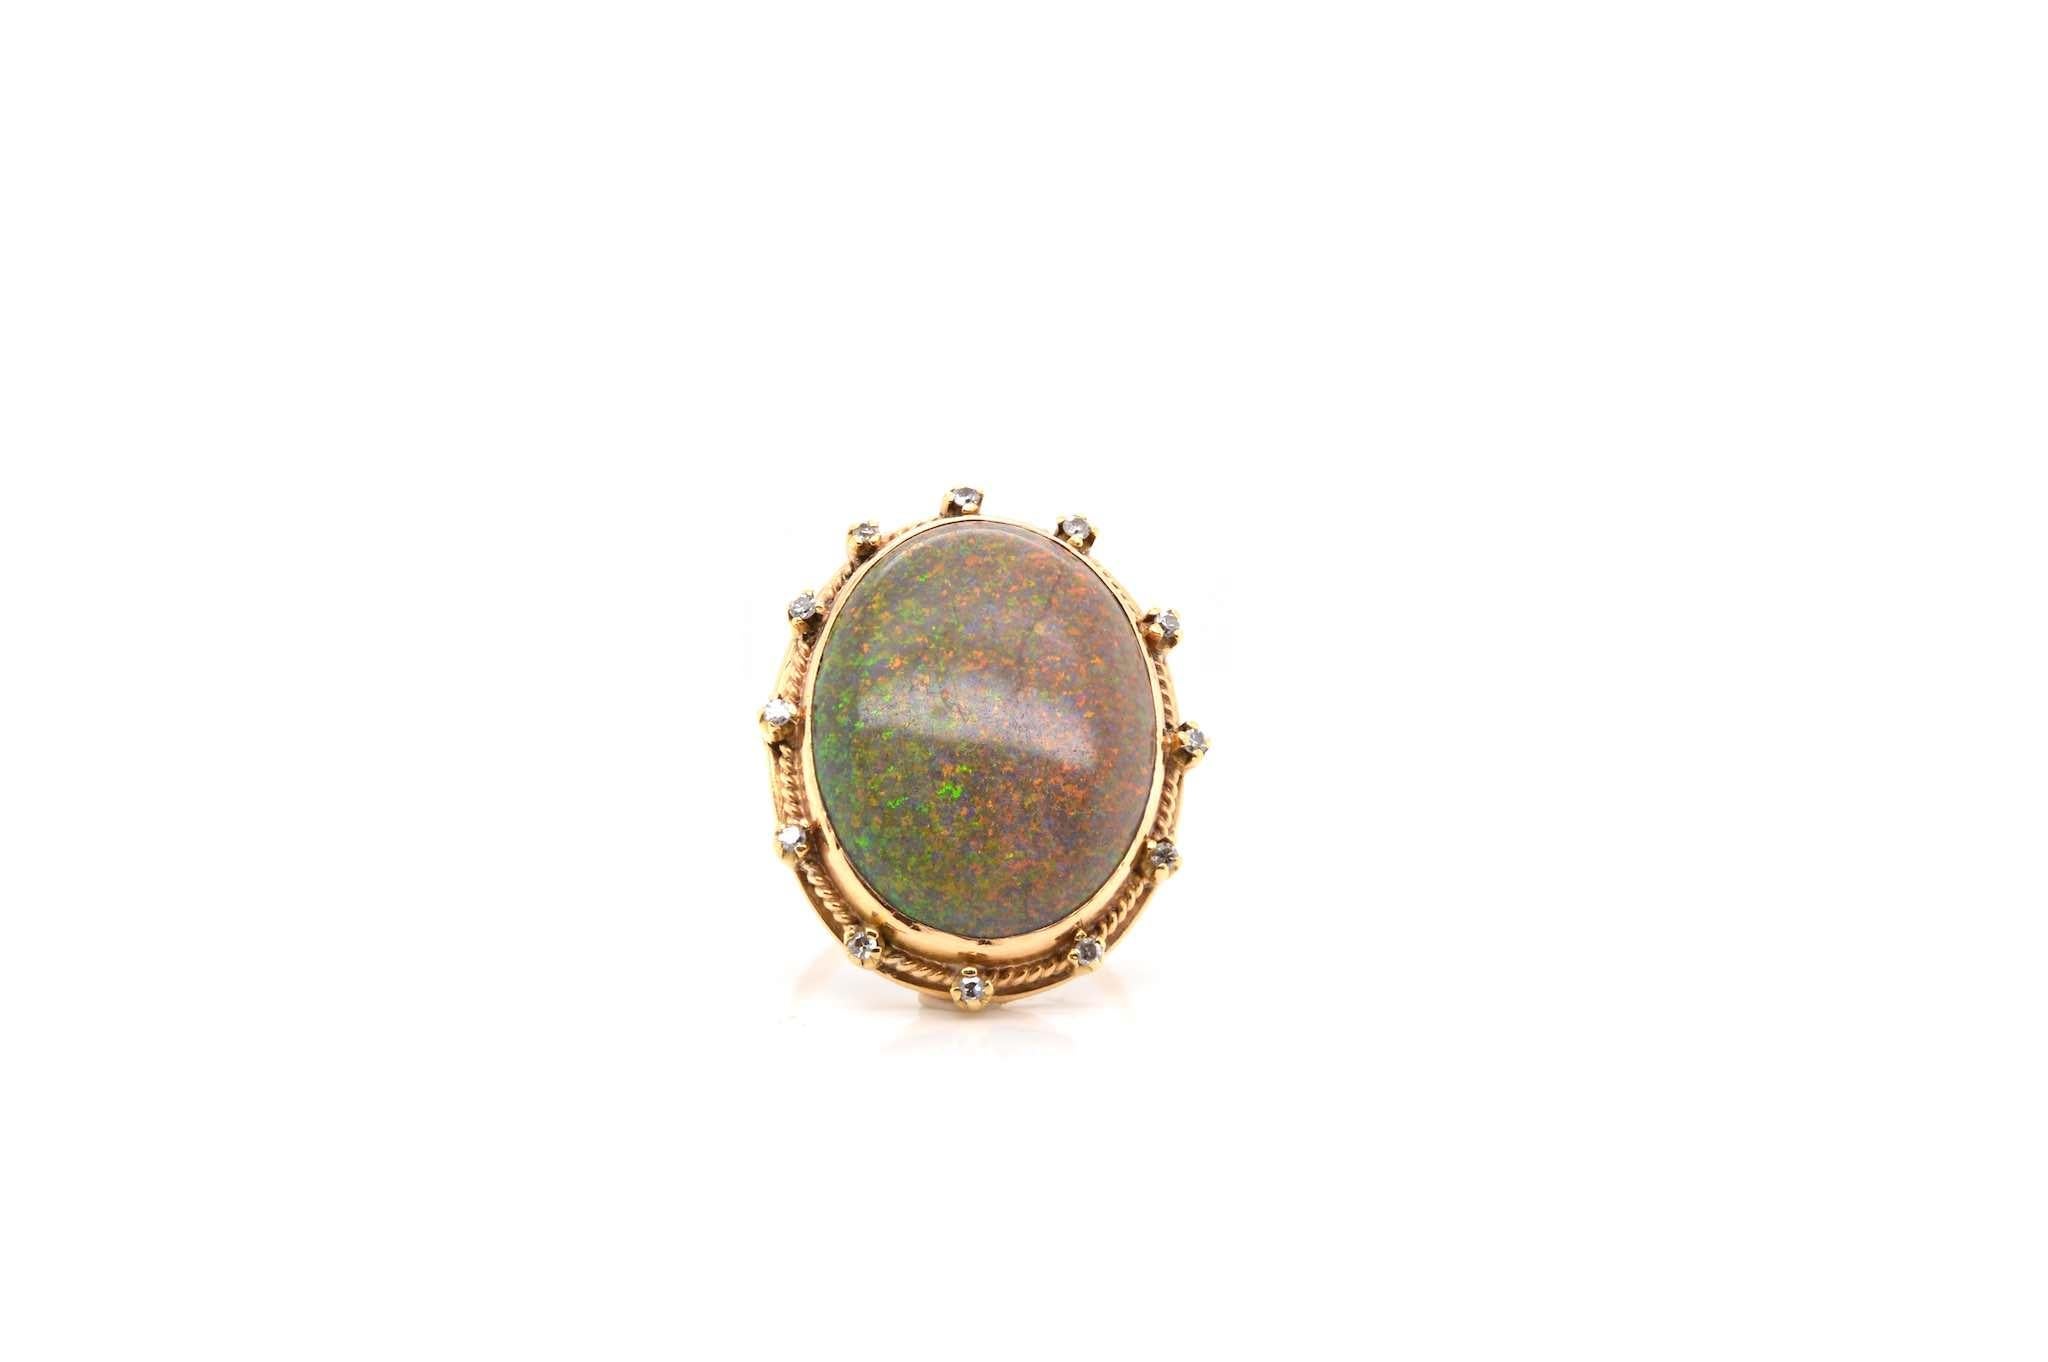 Stones: Opal 2.3 x 1.9 cm
and diamonds of sizes 8×8 for a total weight of 0.12 carats.
Material: 18k yellow gold
Dimensions: 2.9 cm length on finger
Weight: 7.5g
Size: 57 (free sizing)
Certificate
Ref. : 24800